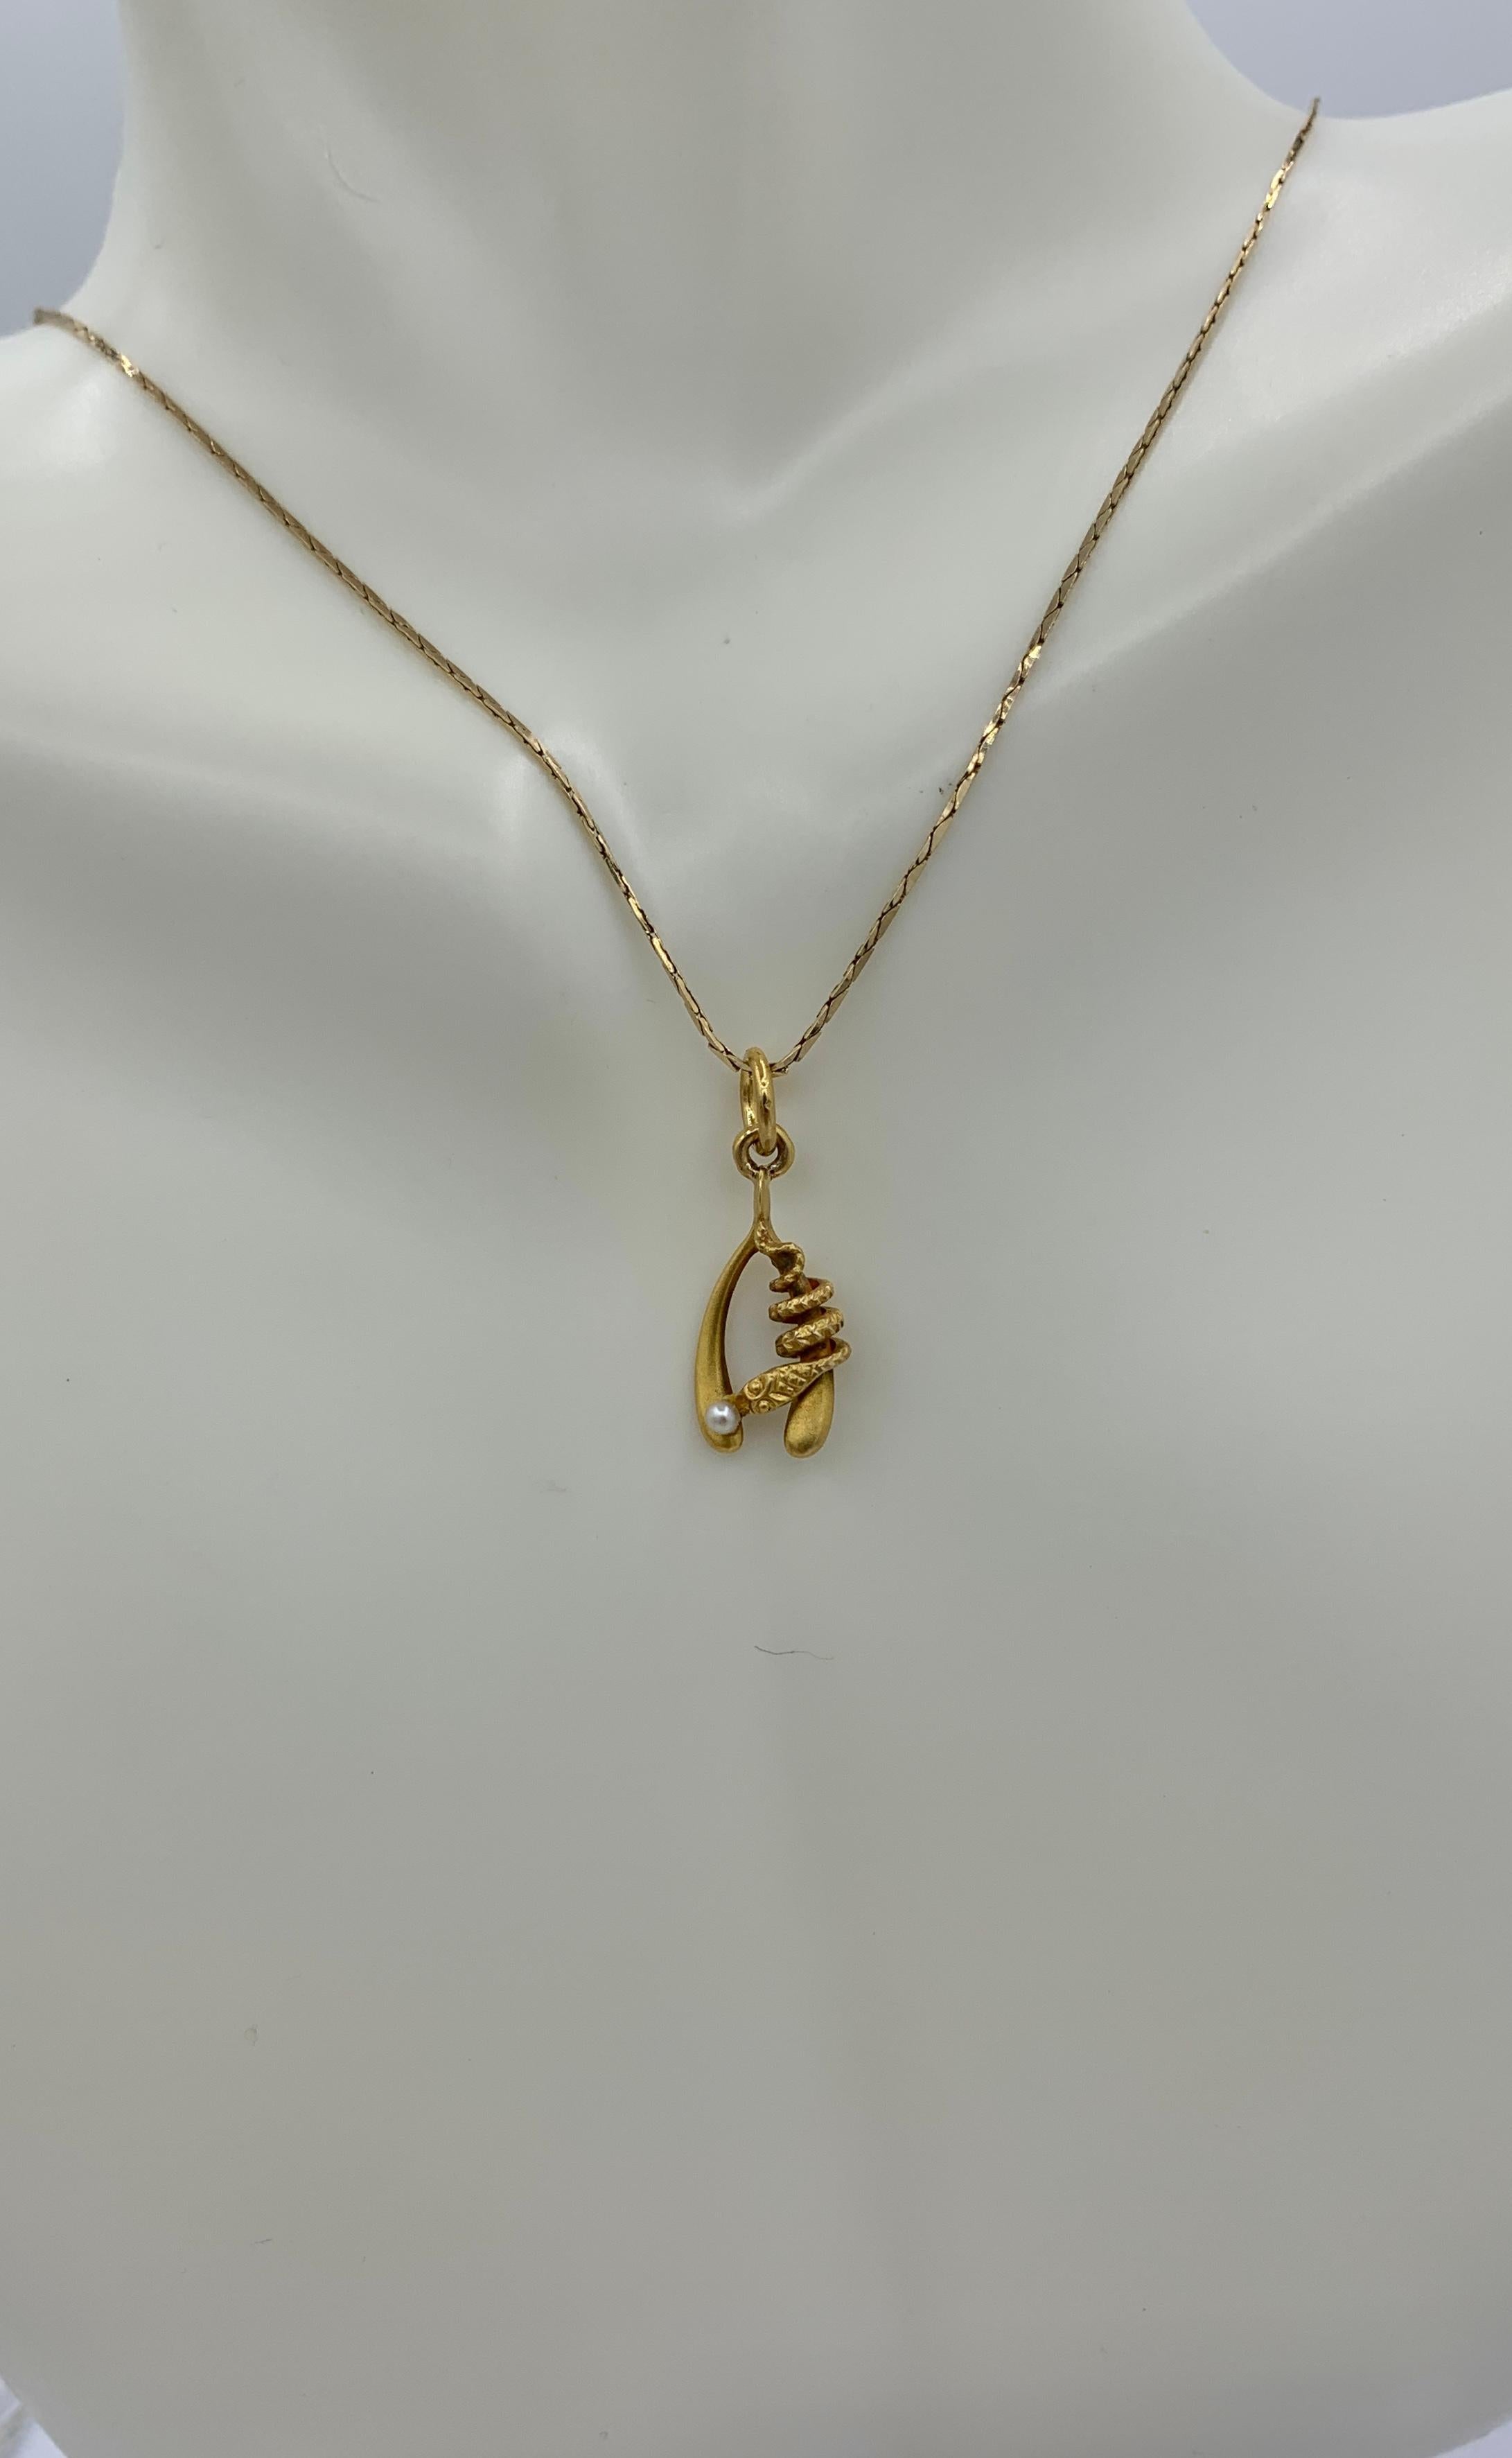 is snake jewelry good luck